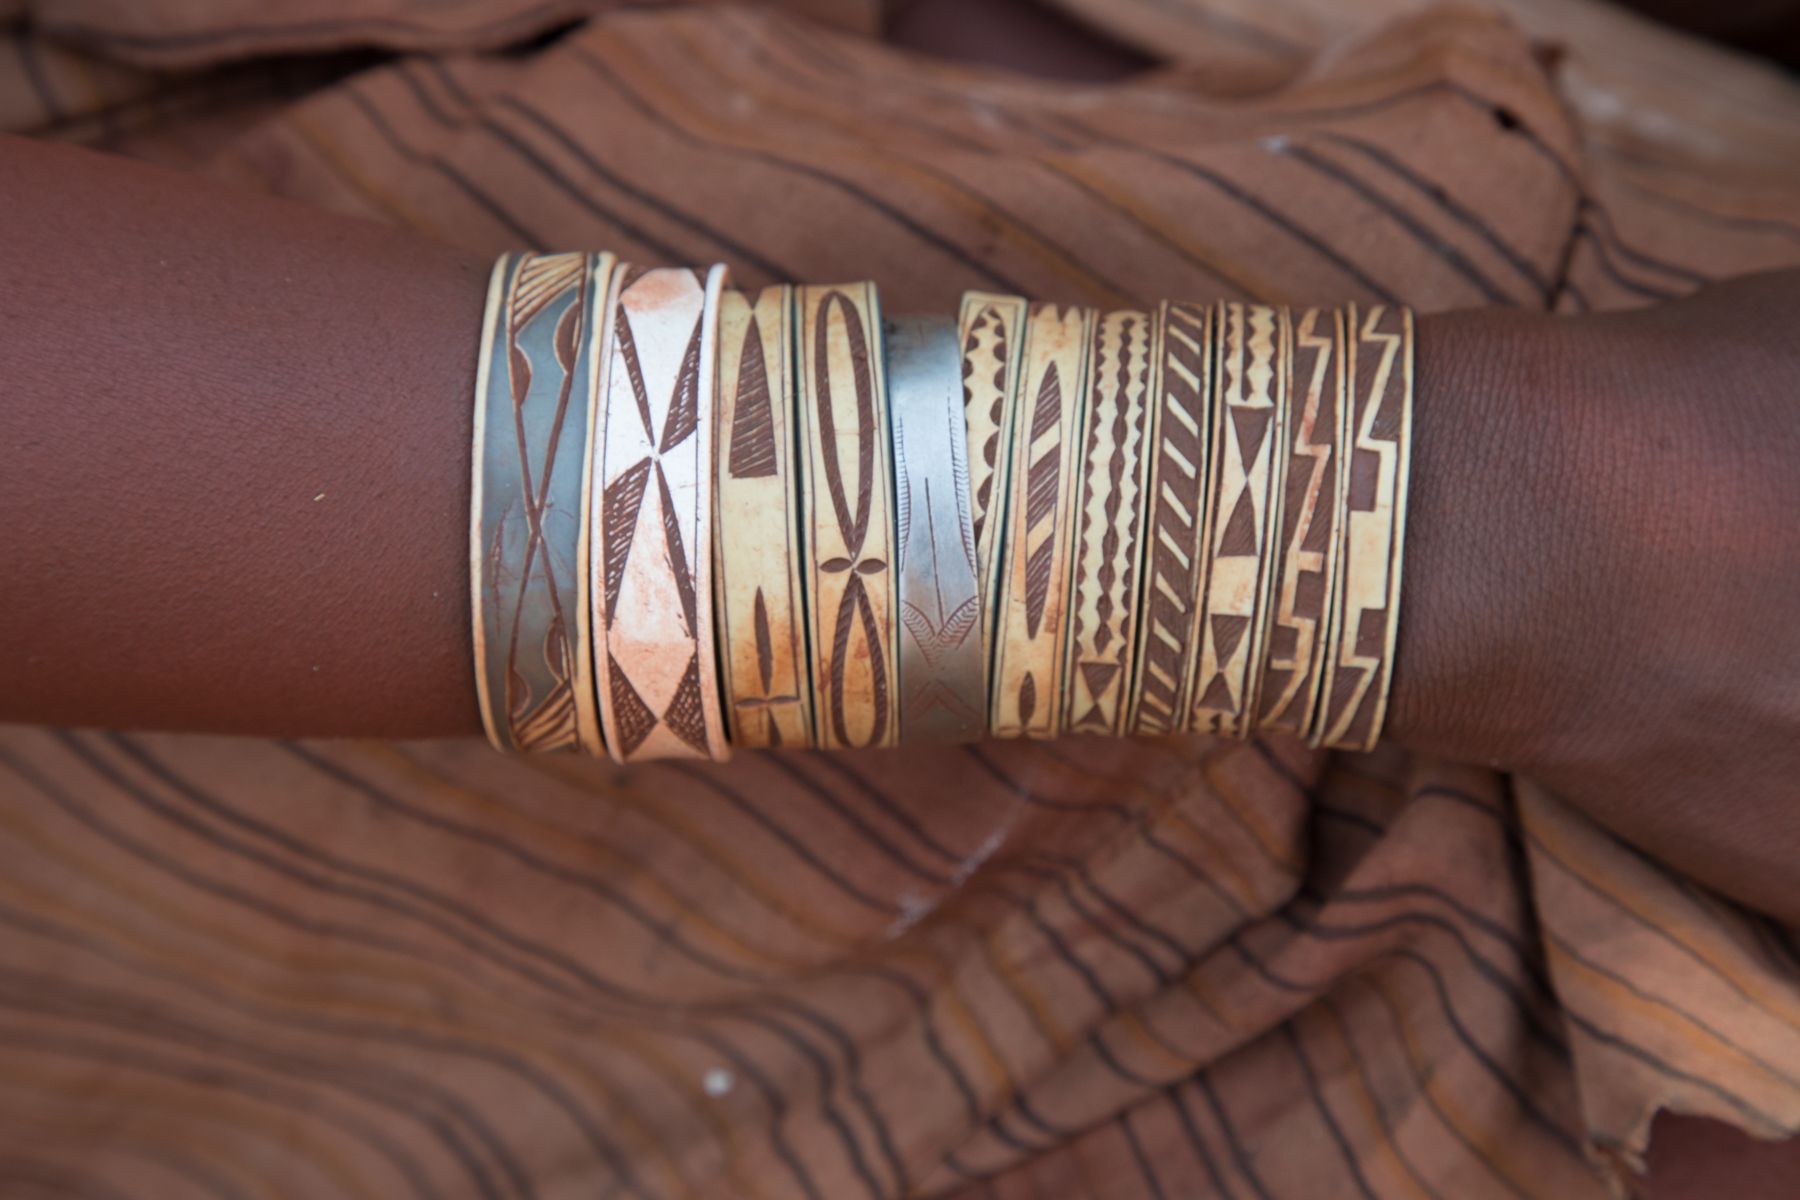 Himba bracelets on our photography tour in Namibia